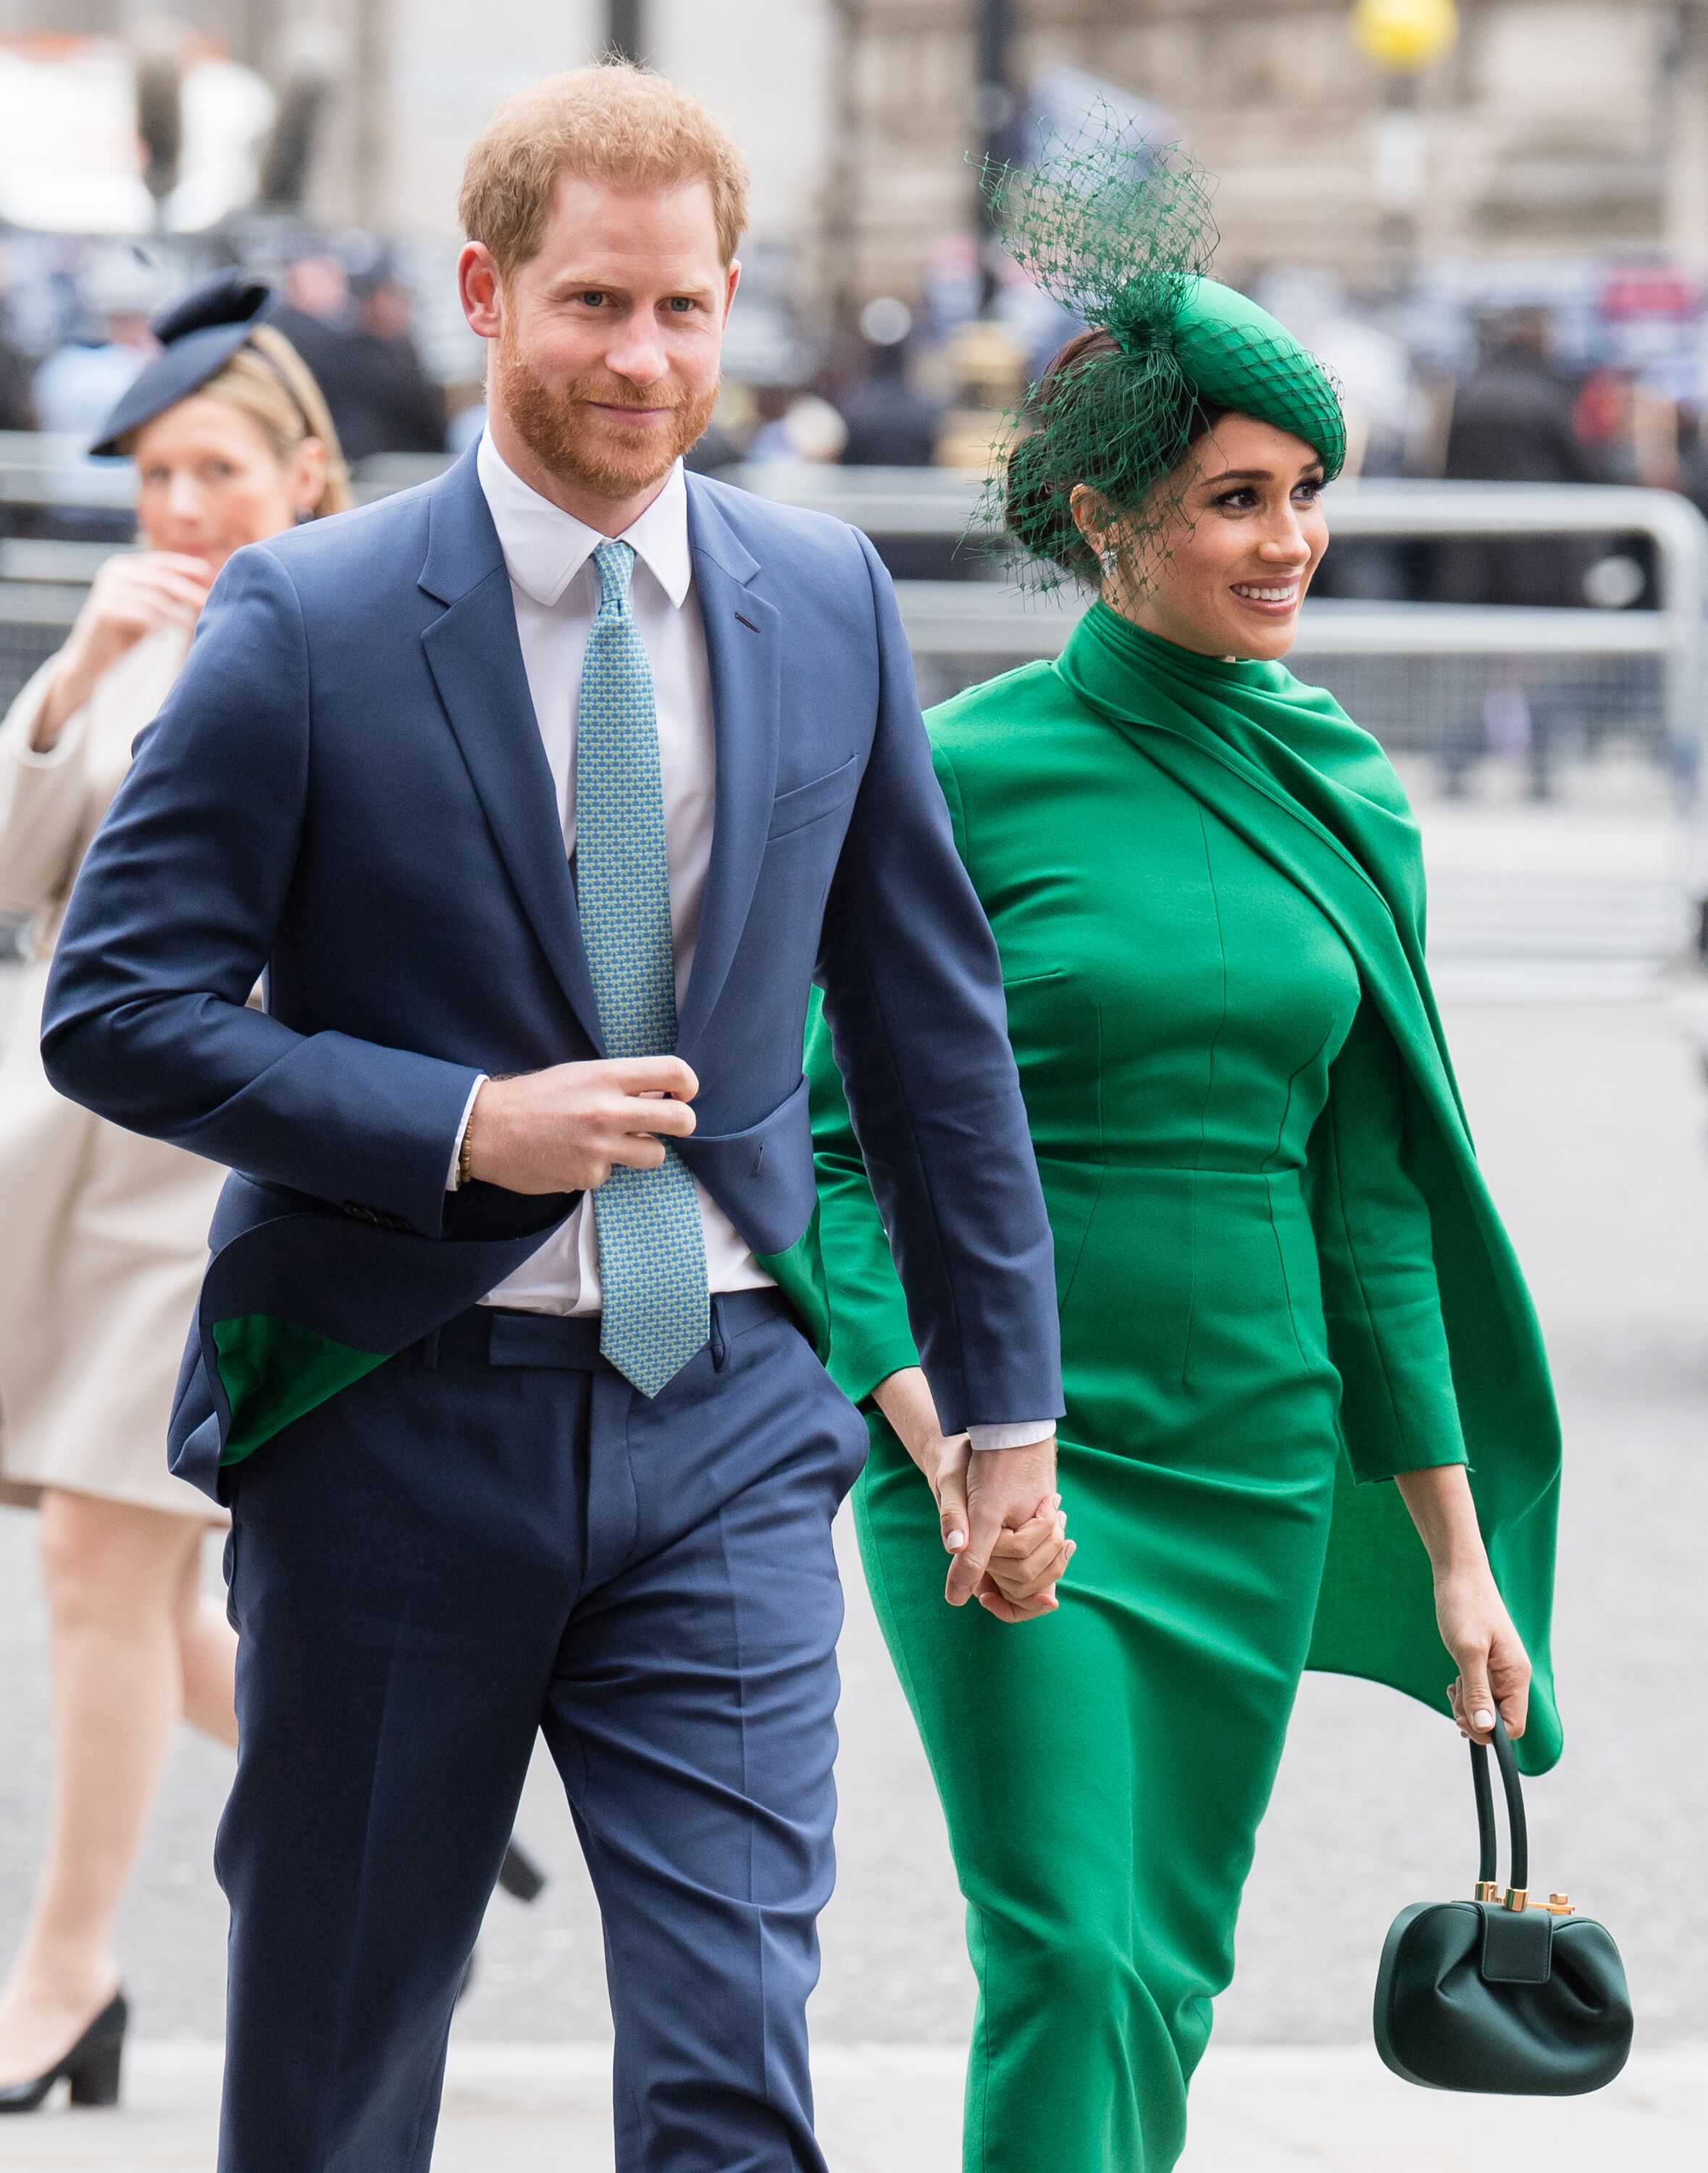 Prince Harry and Duchess Meghan at the Commonwealth Day Service on March 09, 2020, in London, England | Photo: Samir Hussein/WireImage/Getty Images